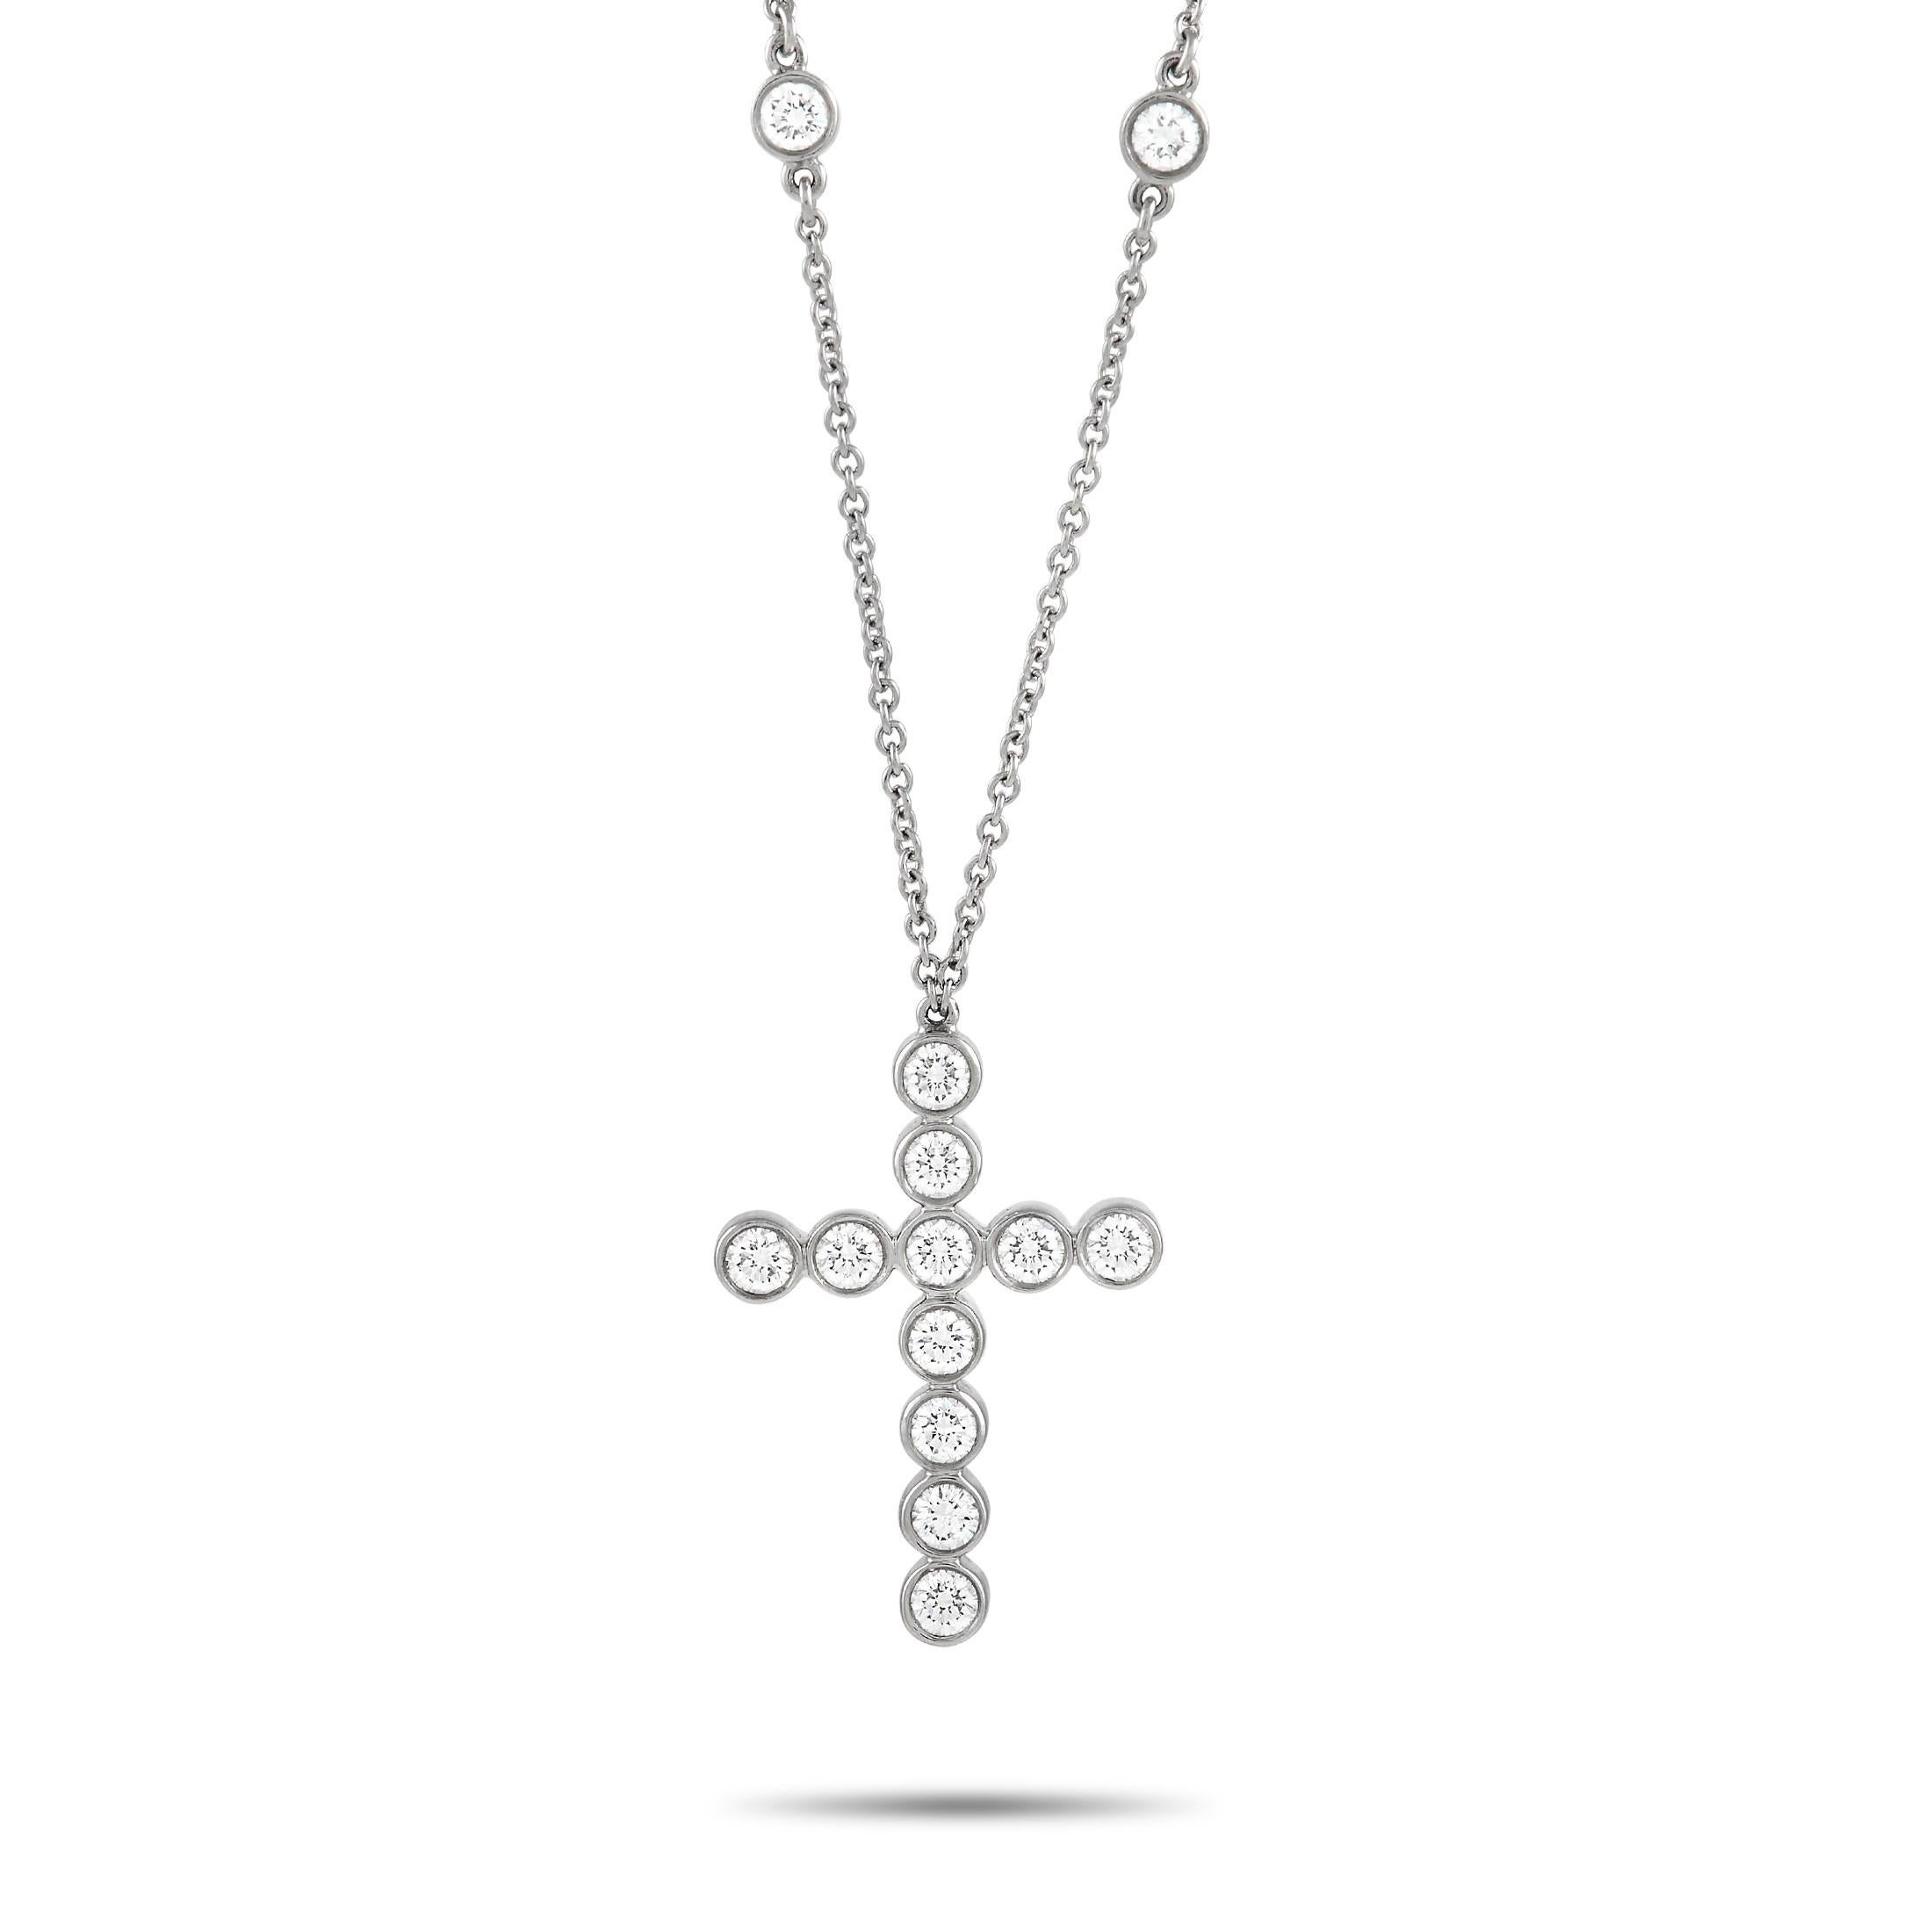 Keep faith close to your heart with this Tiffany & Co. Jazz Platinum 0.90 ct Diamond Cross Pendant Necklace. It features a 16-inch long chain holding a cross-shaped pendant of about an inch in size. The pendant comes adorned with 11 diamonds on